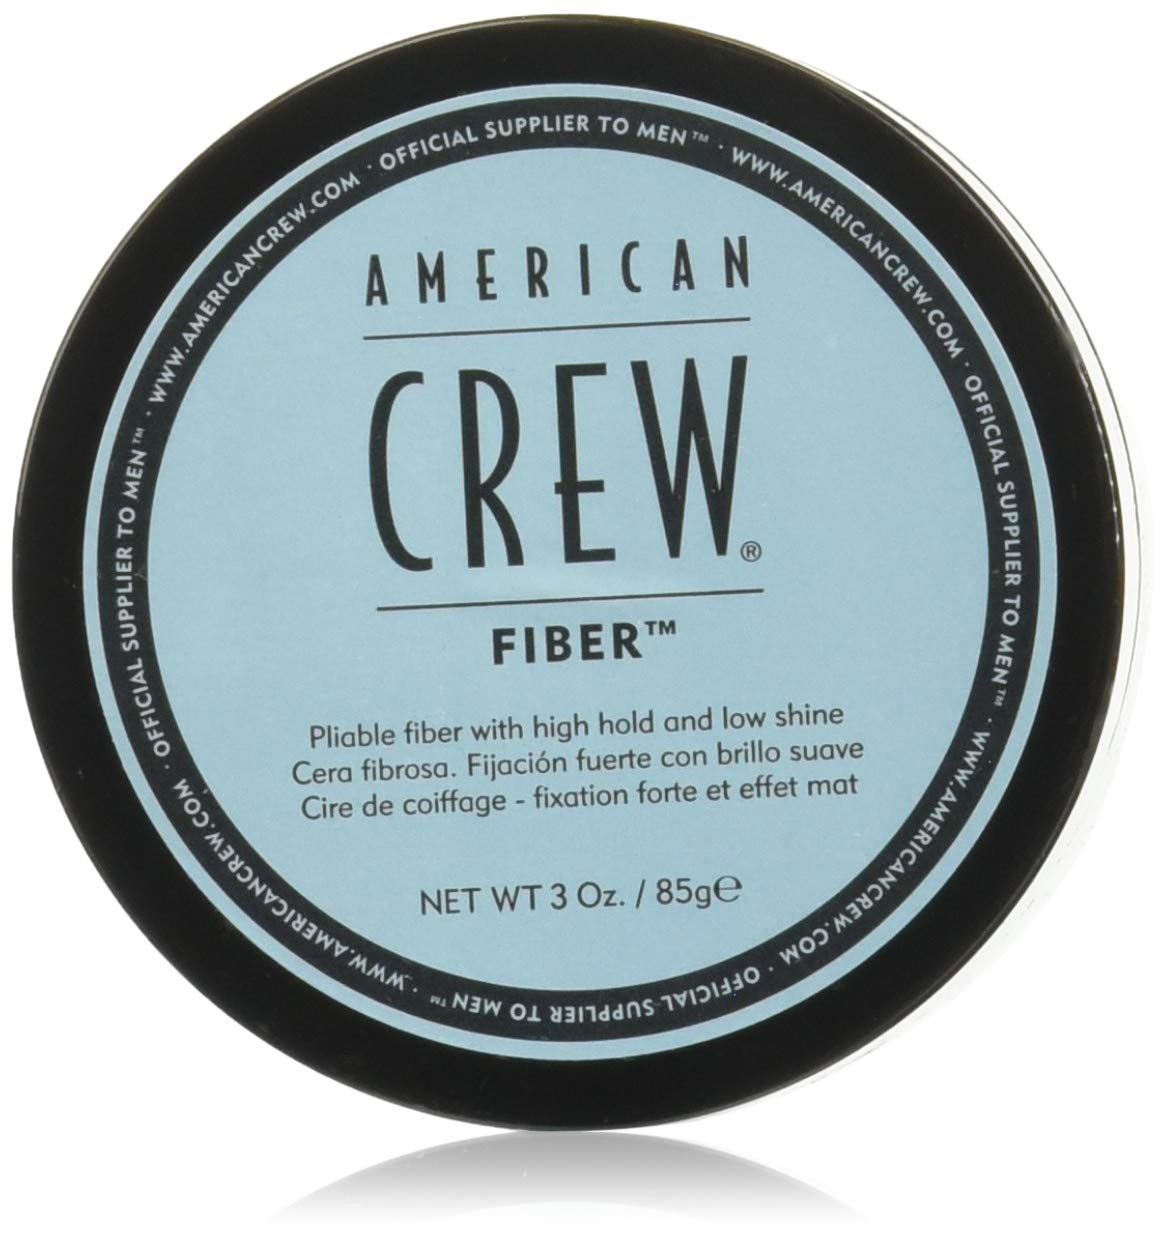 American Crew Fibre Pliable Moulding Cream for Men, 3.53 Ounce Jars (Pack of 2) by American Crew